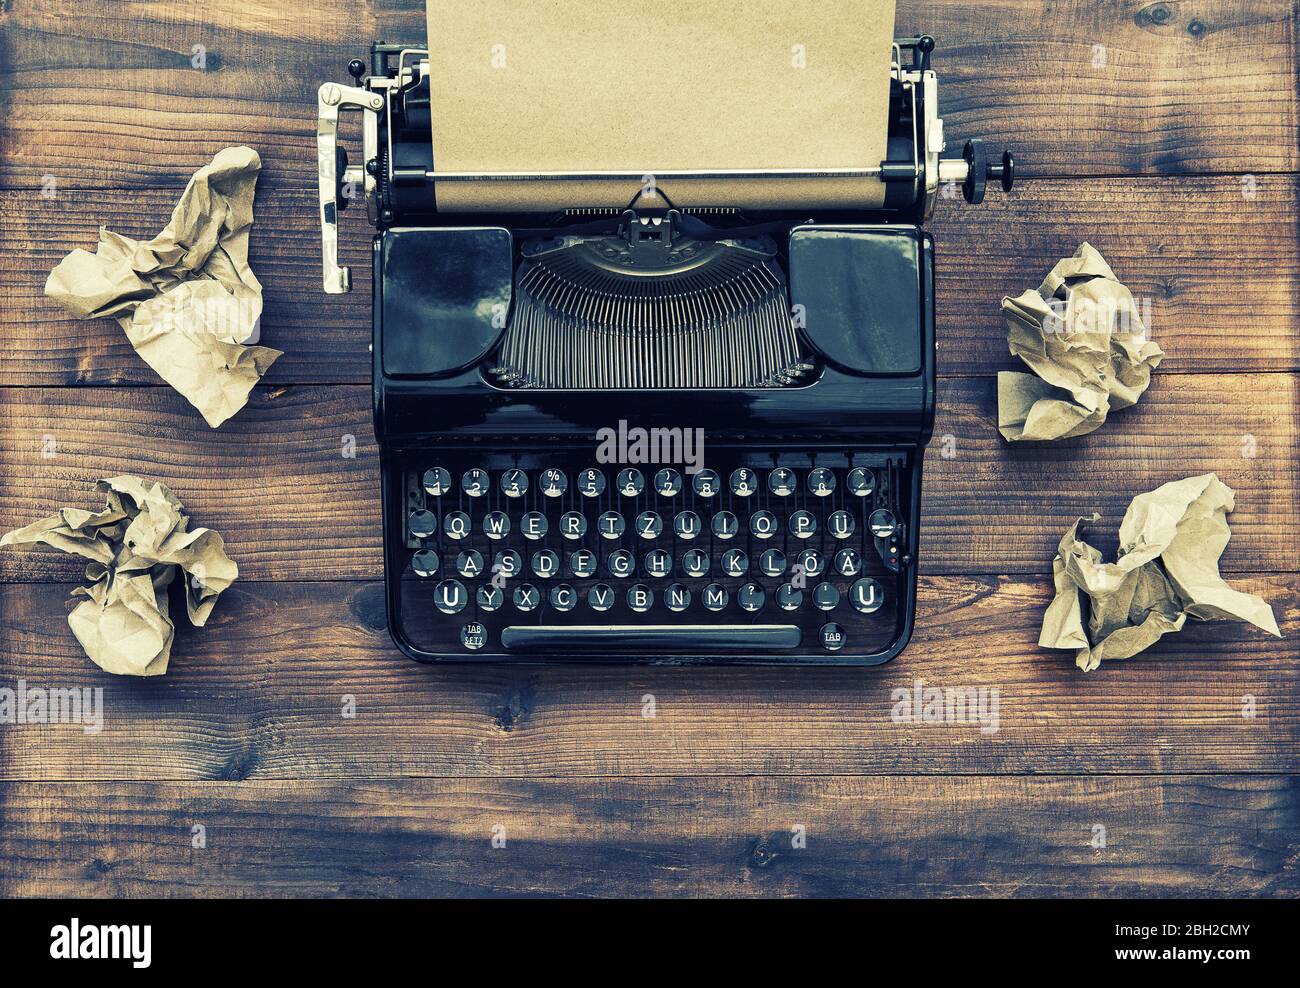 Antique typewriter with aged paper. Creativity inspiration writing. Vintage toned Stock Photo